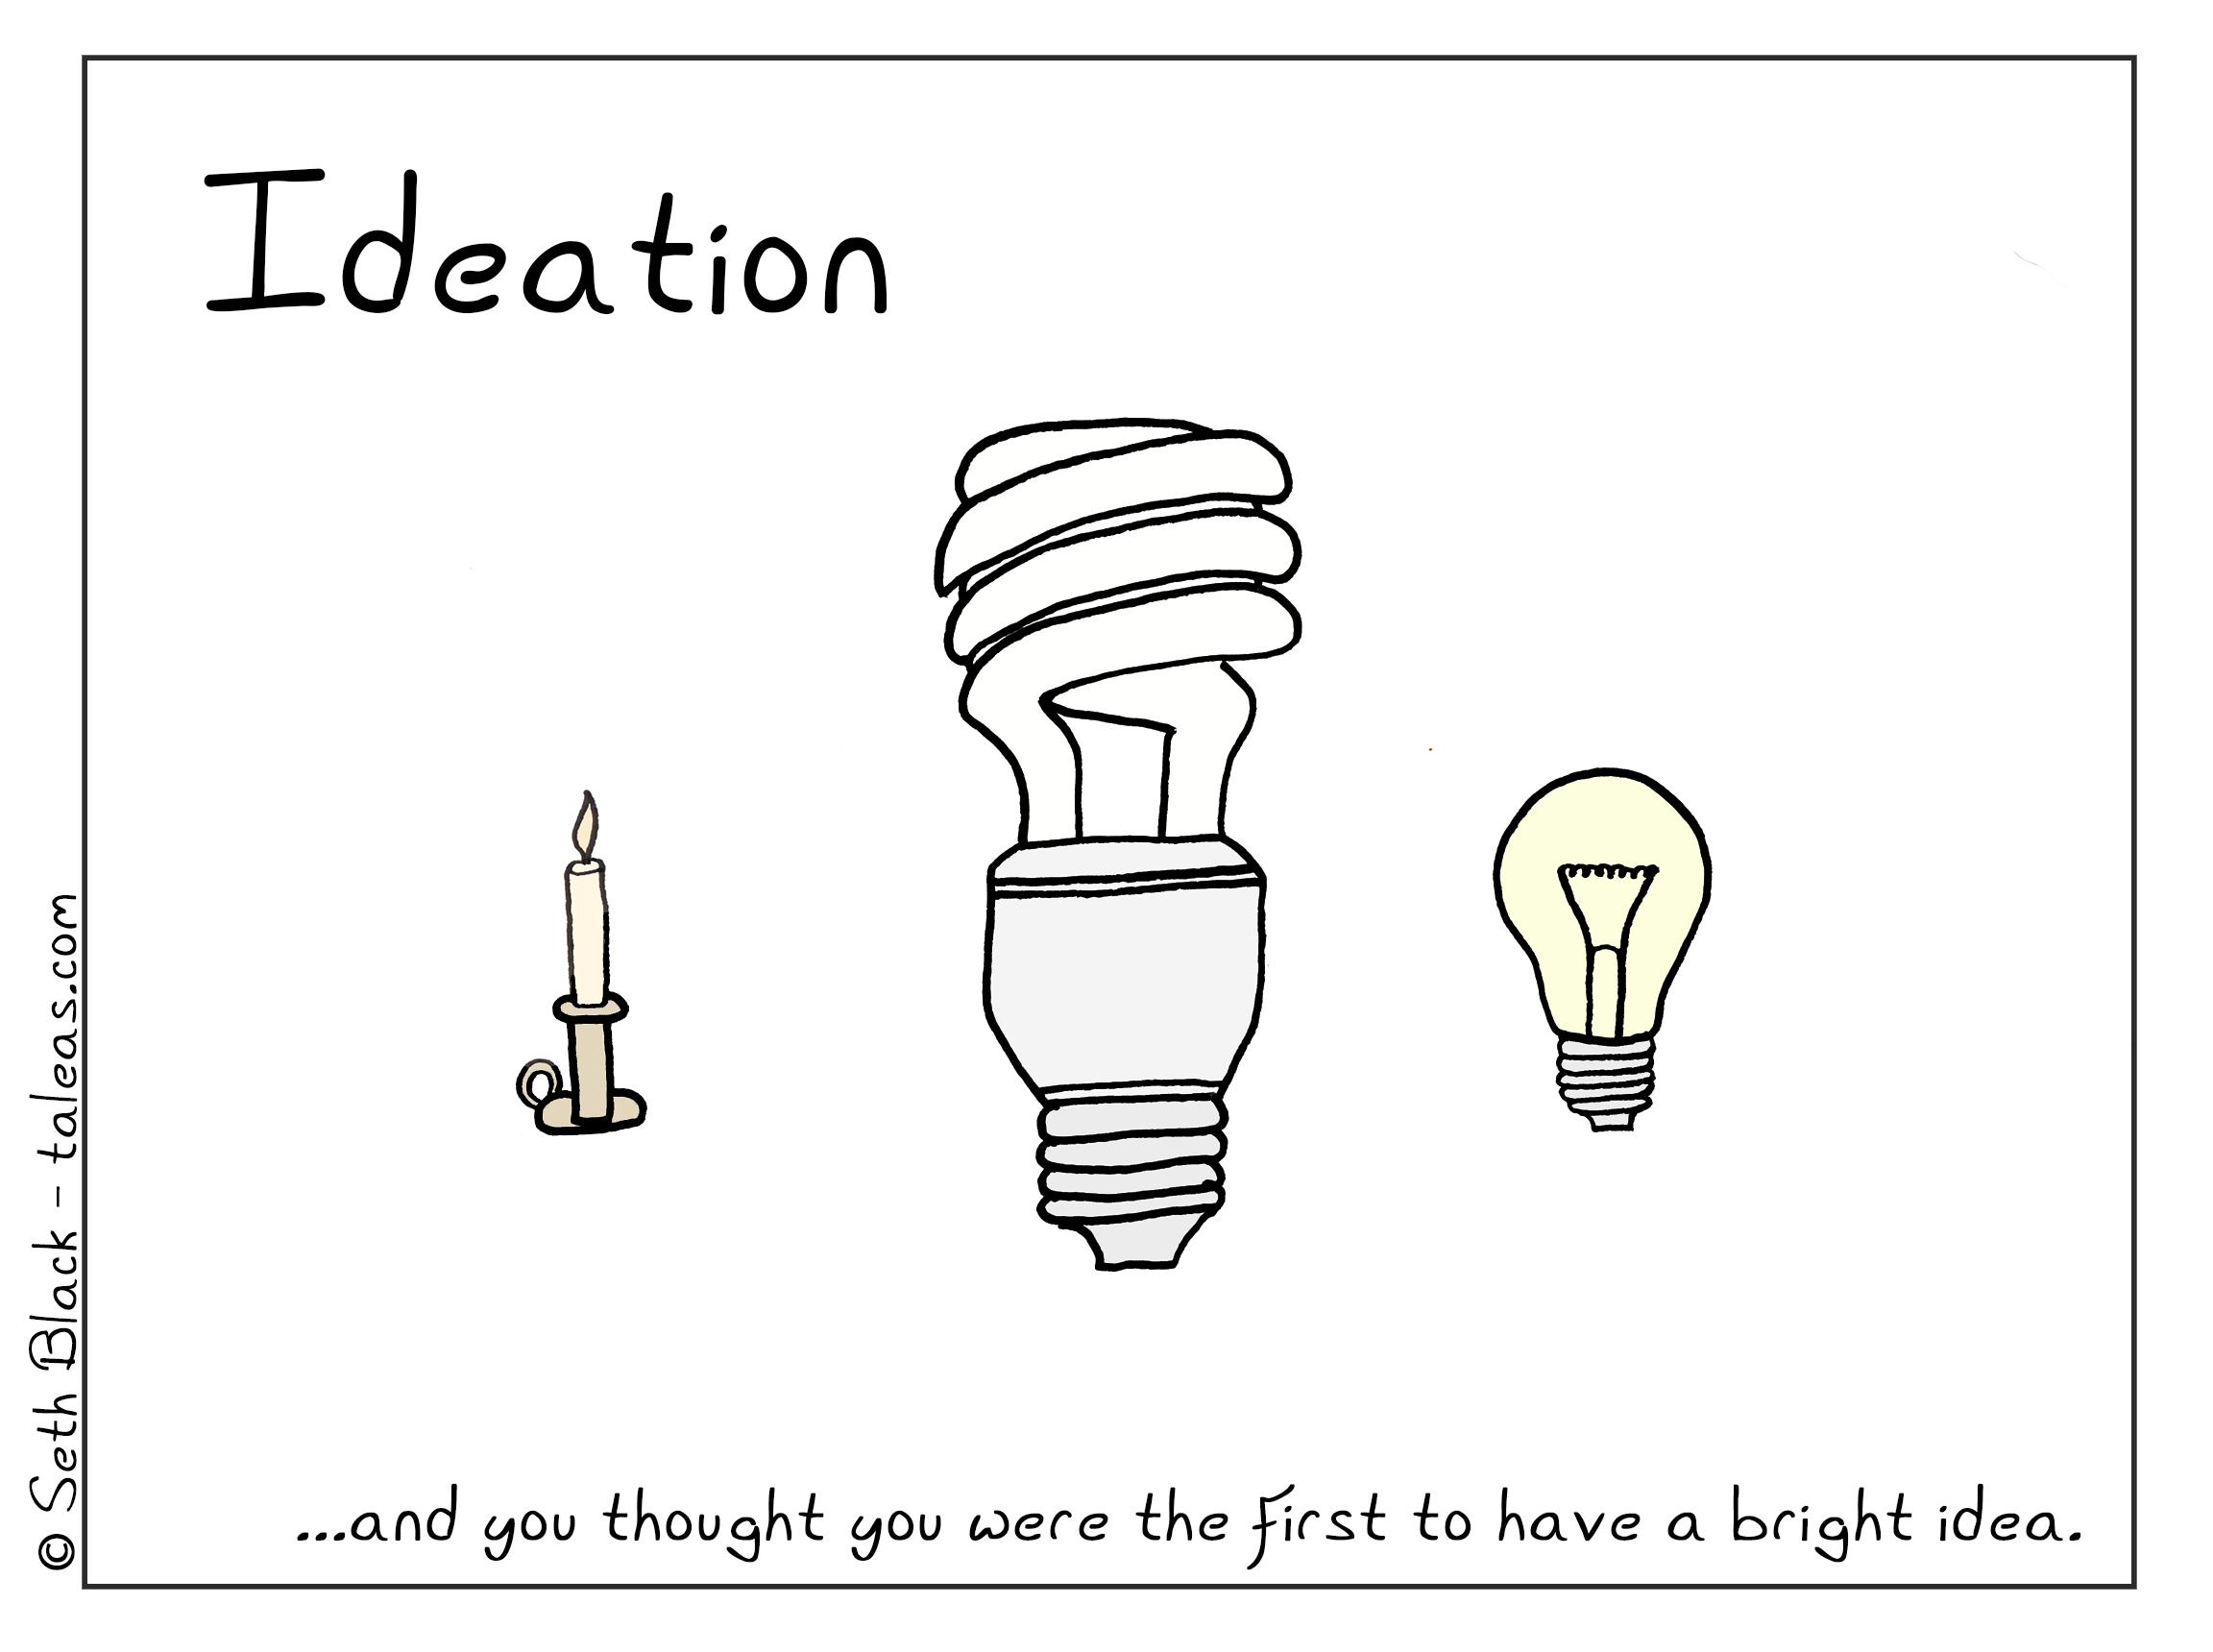 A poster containing a lit candle, a tungston lightbulb and a compact fluorescent bulb. "Ideation: and you thought you were the first to have a bright idea."